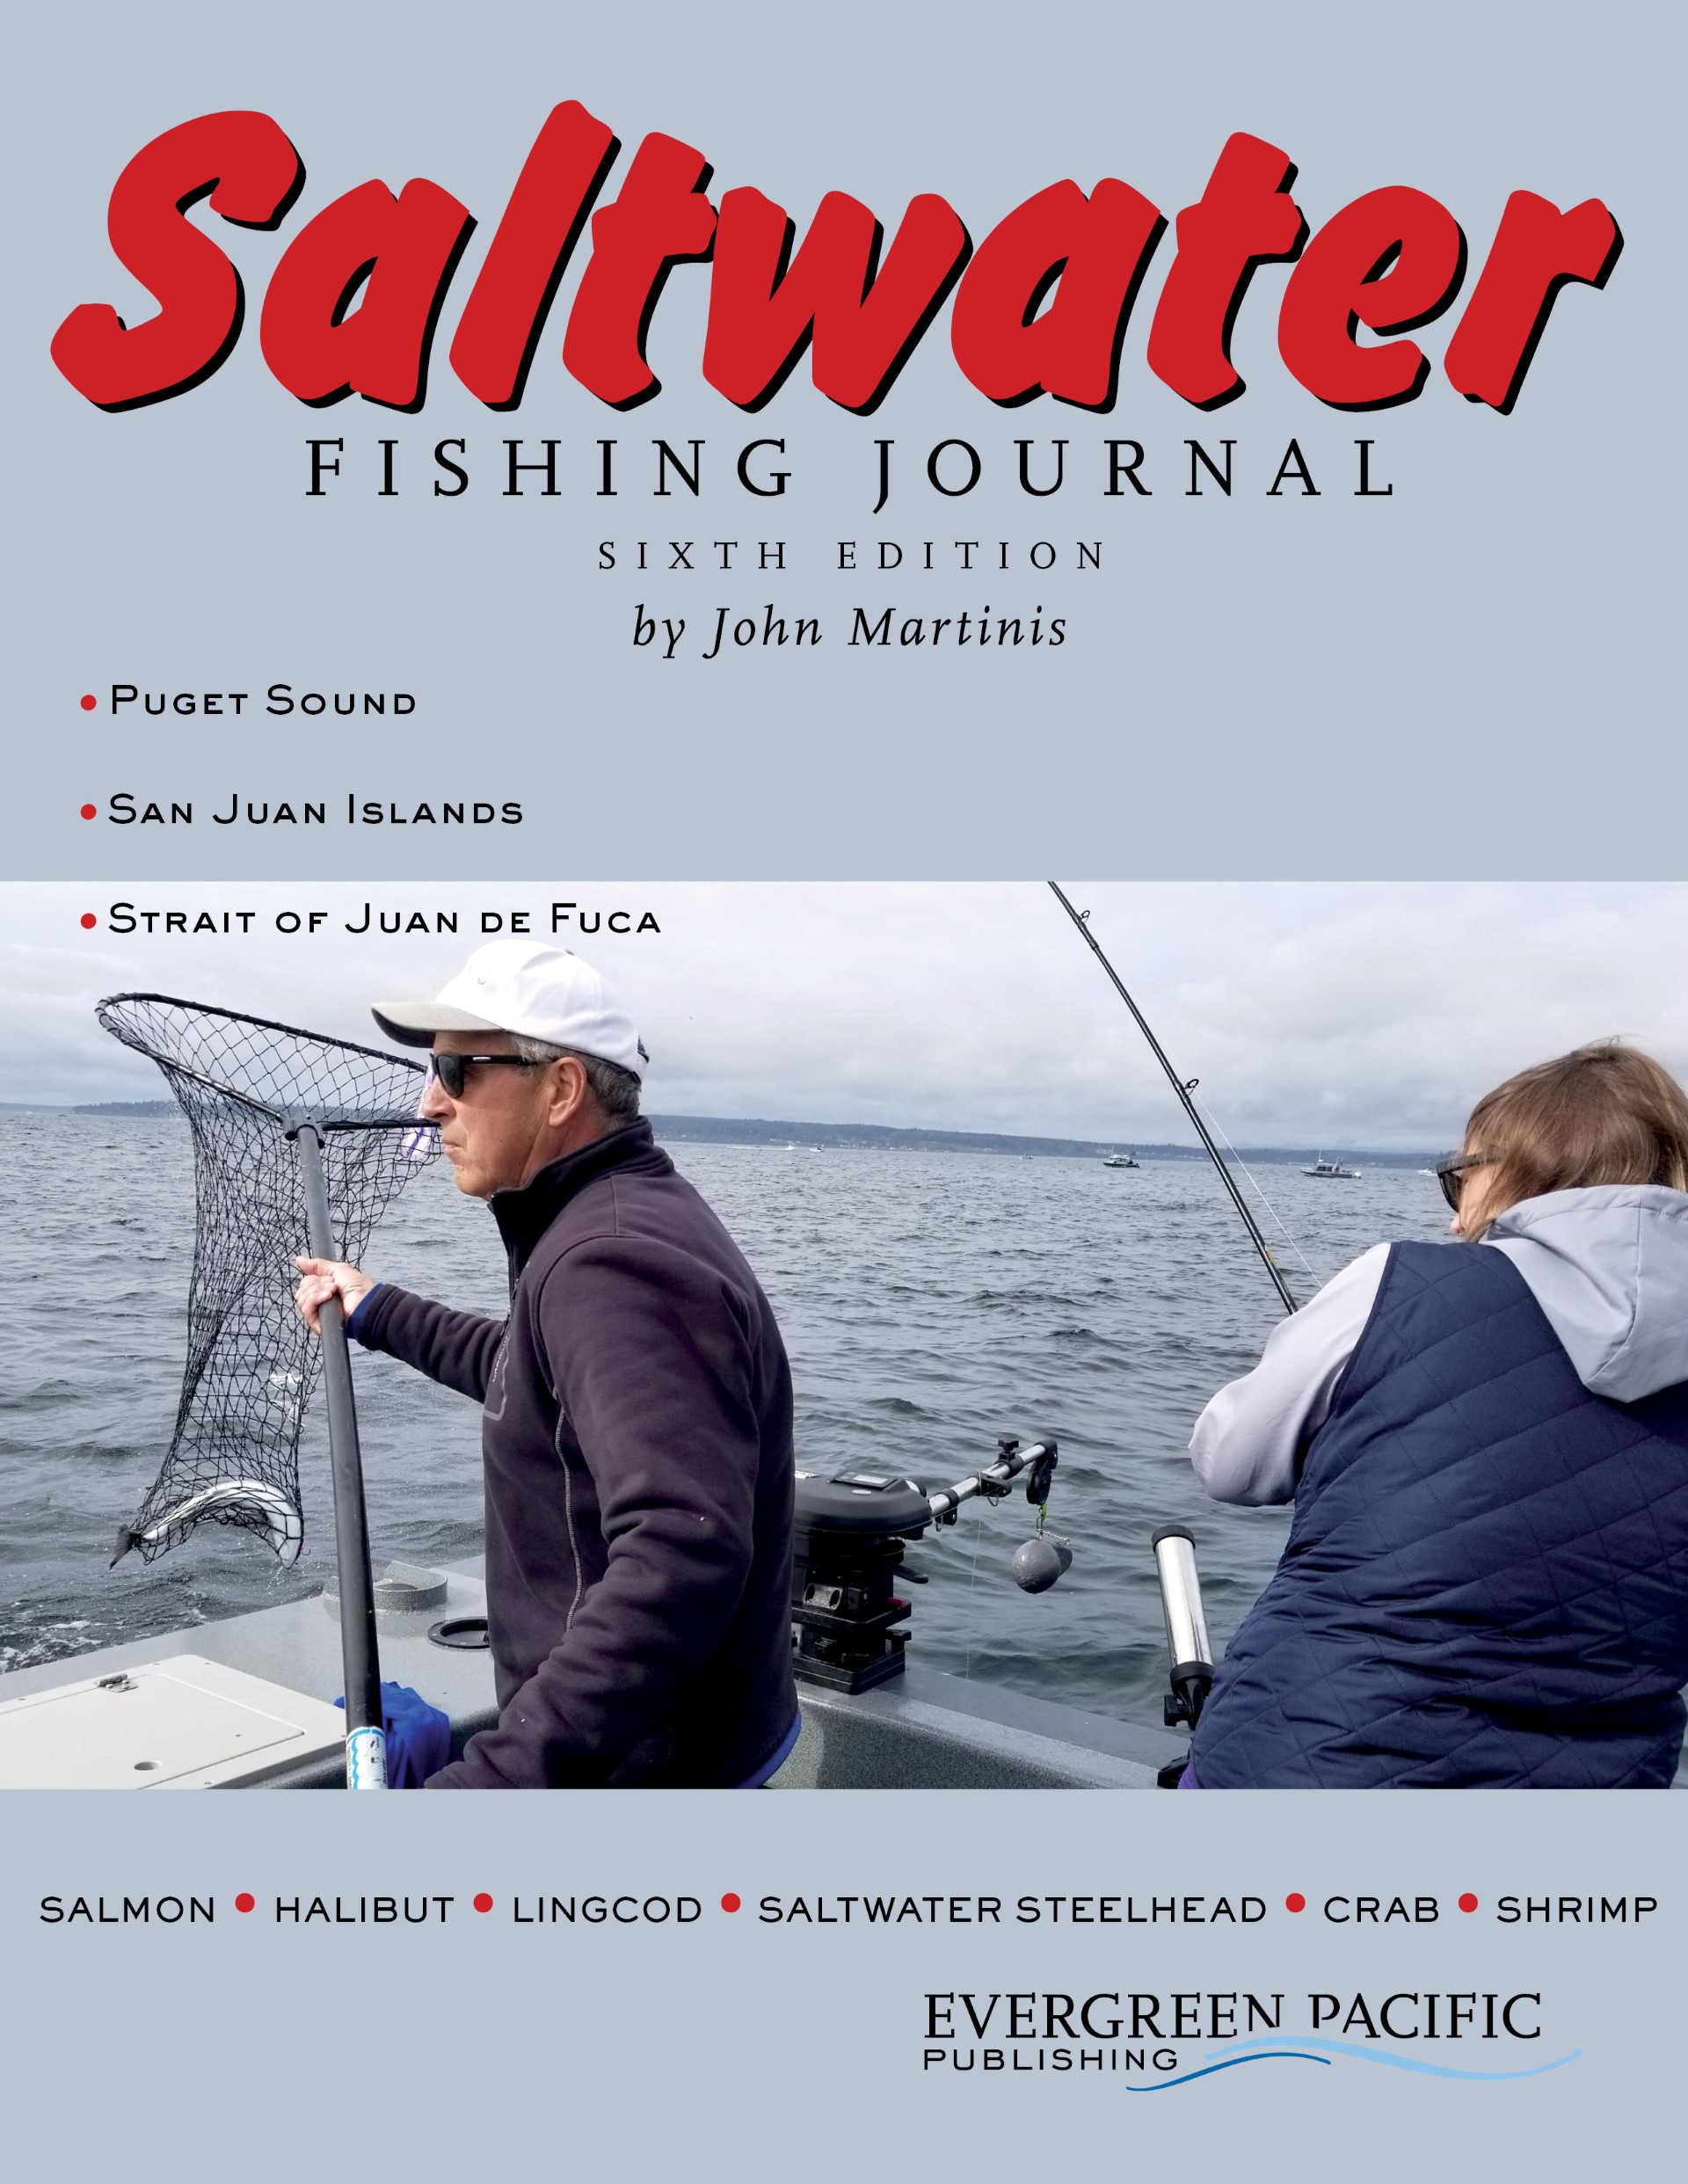 Pro-Troll Fishing Products - A Guide to Salmon Fishing